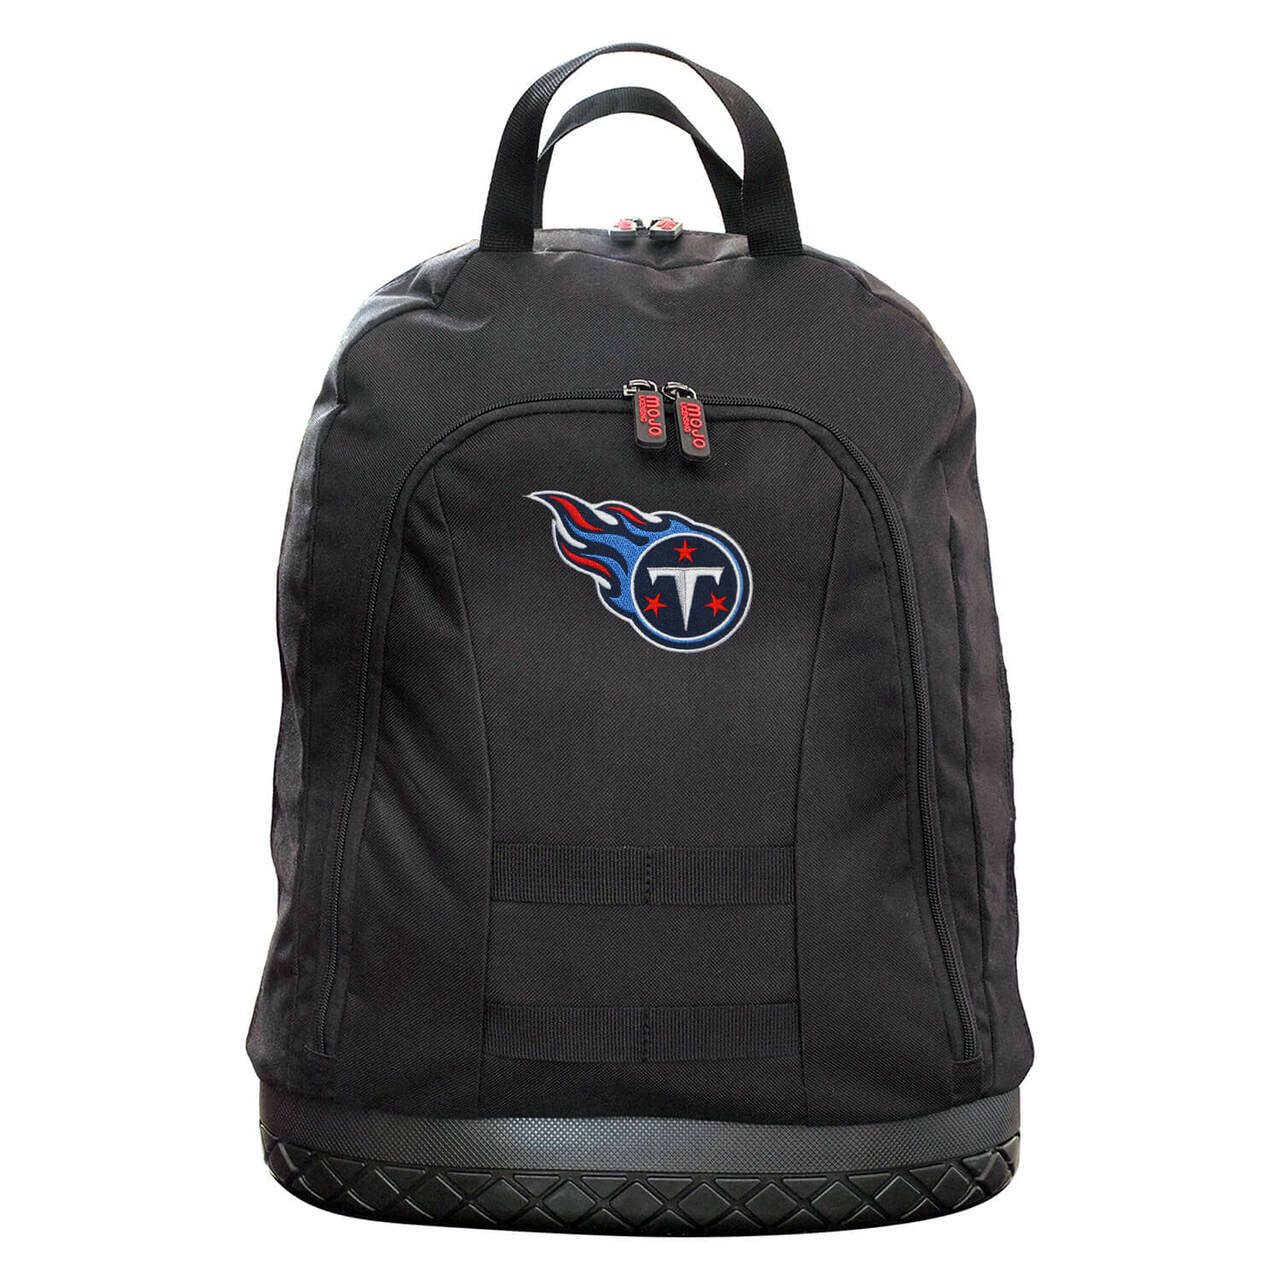 Tennessee Titans Backpack Tool Bag